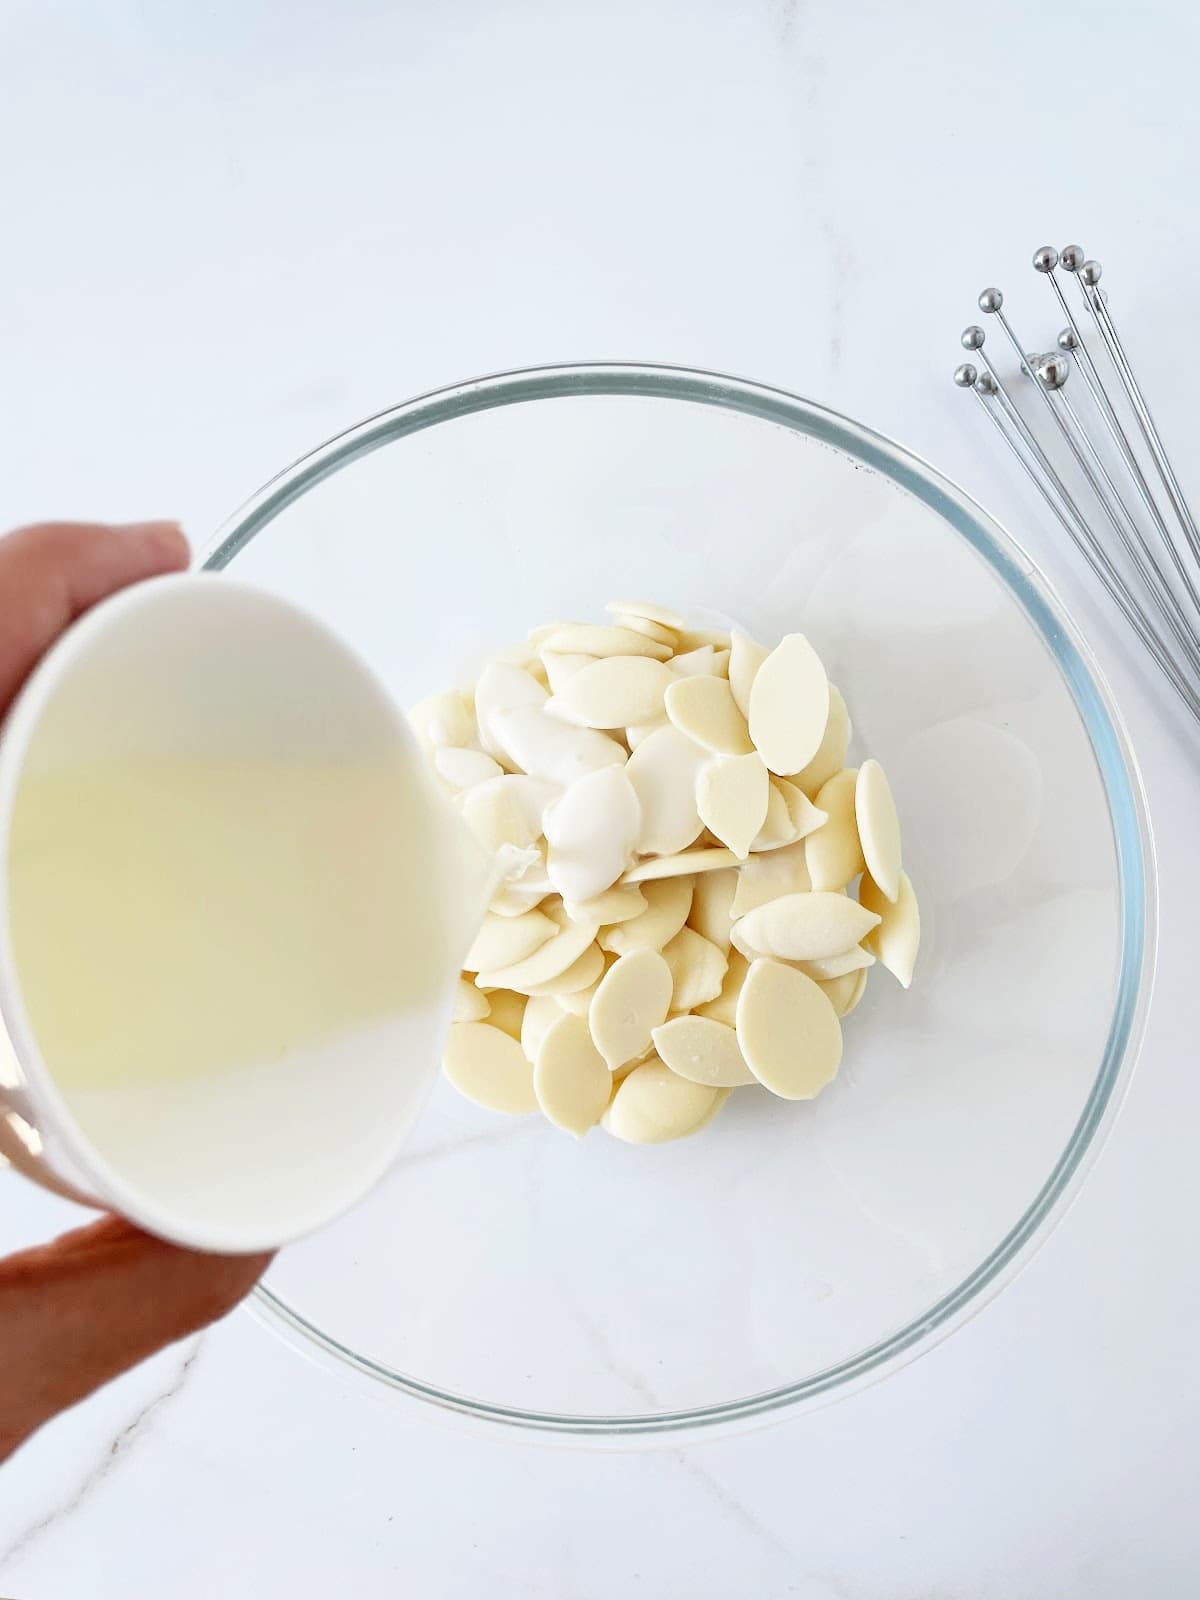 White chocolate pieces in a glass bowl. Cream being poured over. White surface. 